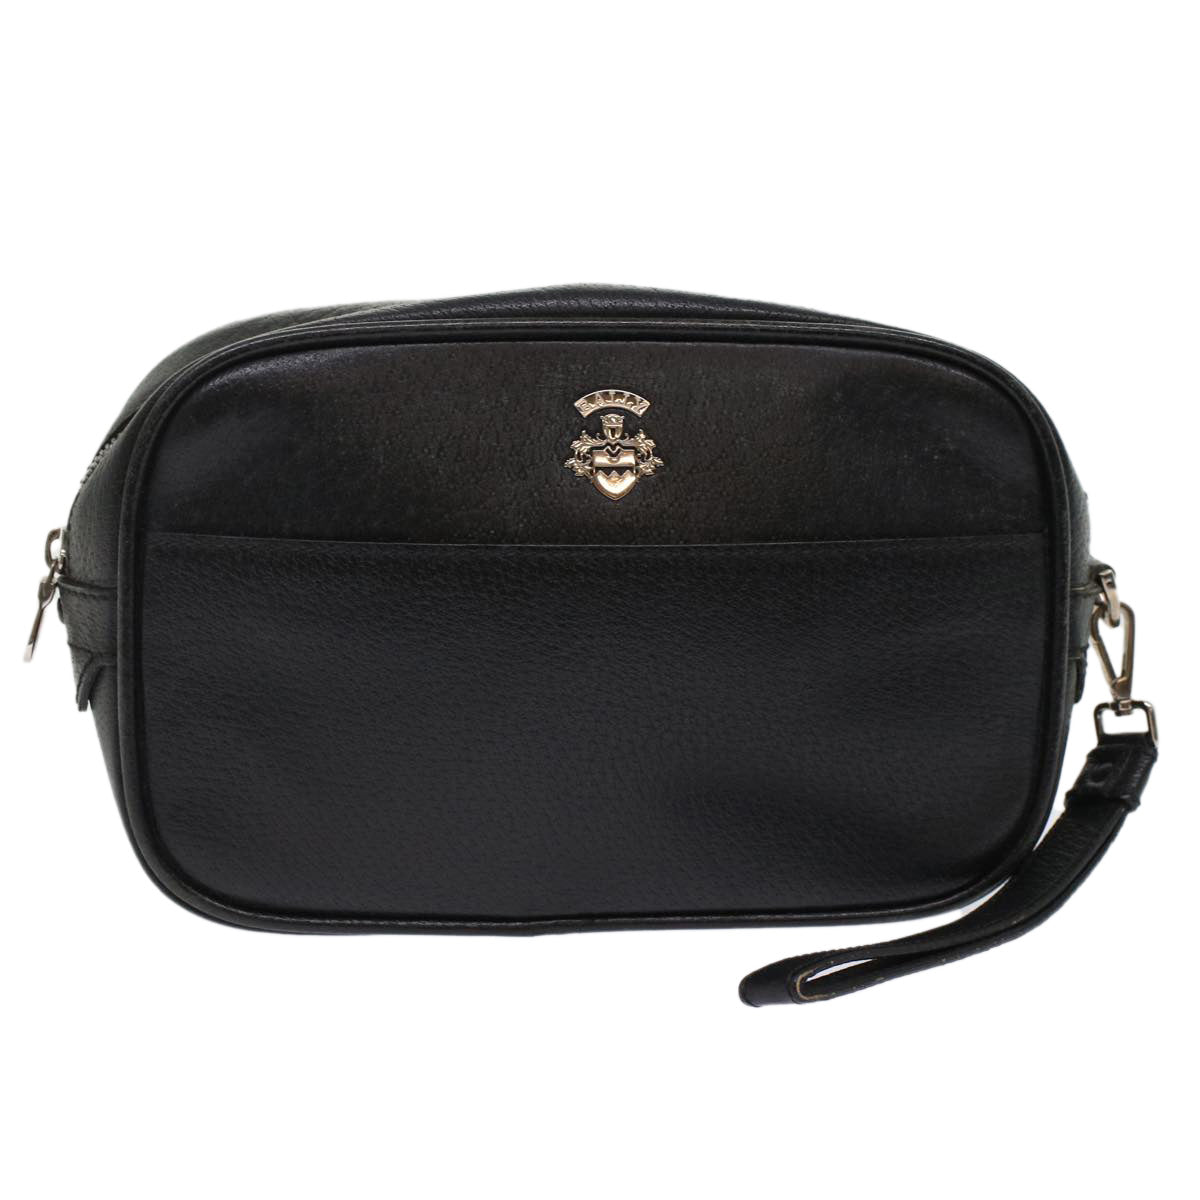 BALLY Clutch Bag Leather Black Auth bs7001